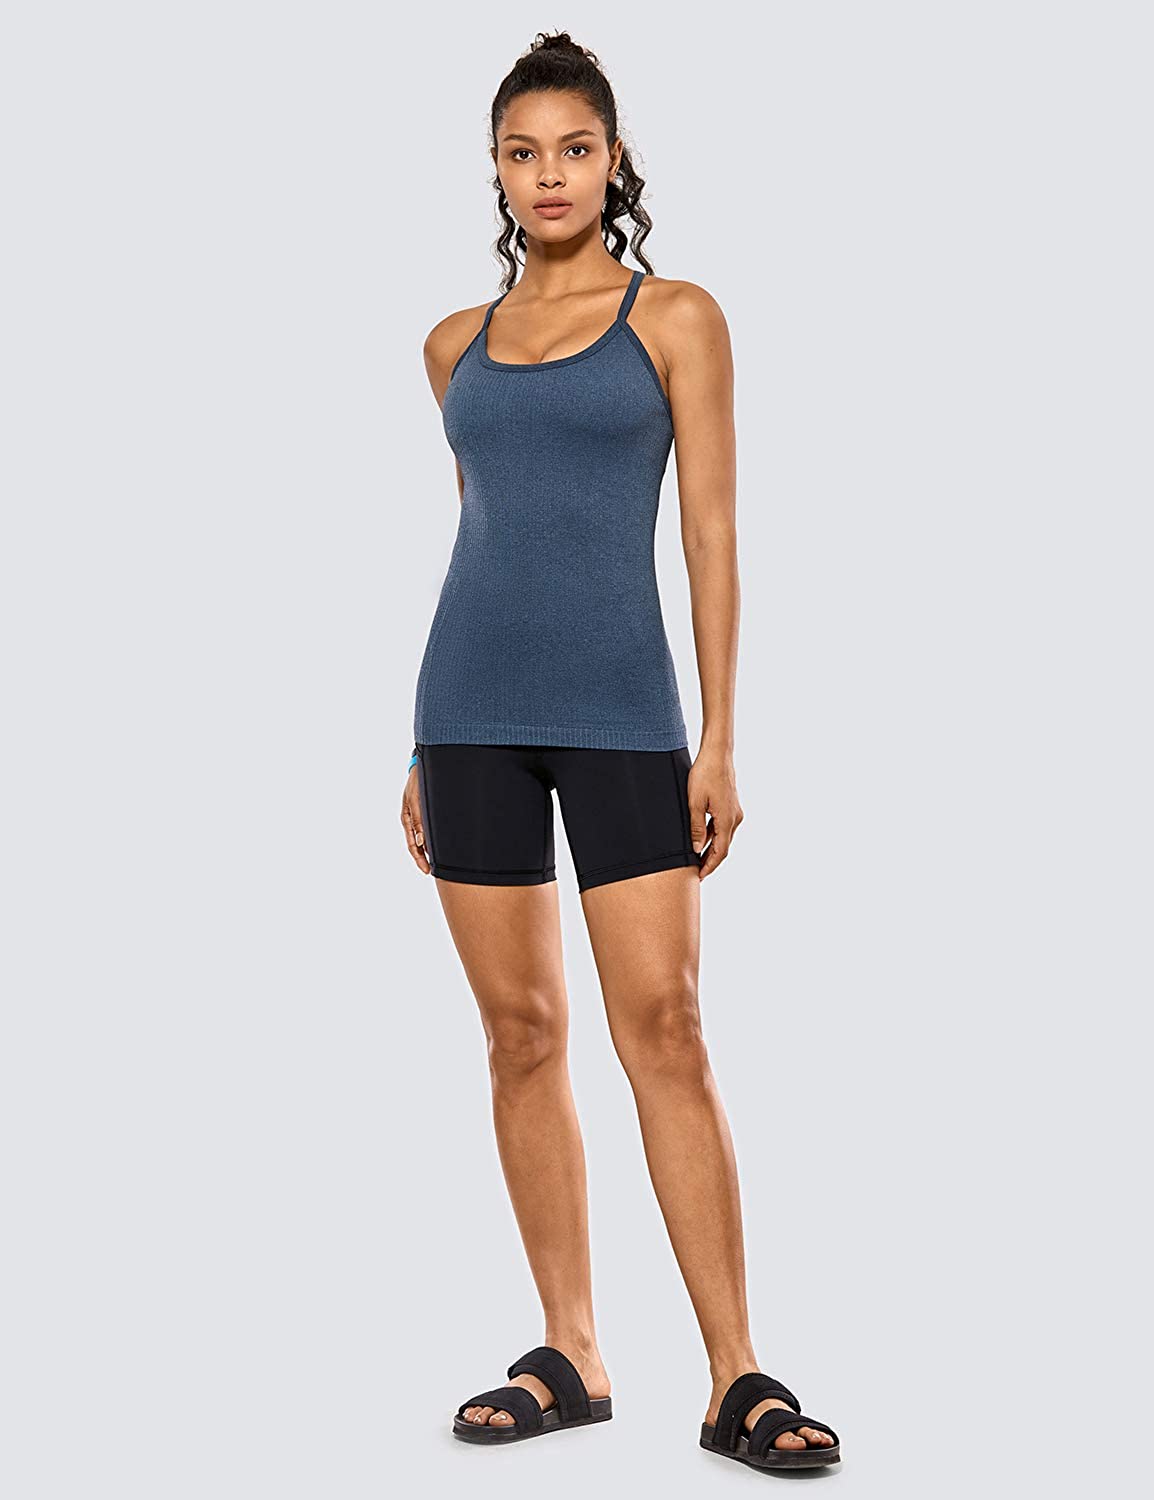 Simple Cami Workout Tank for Gym